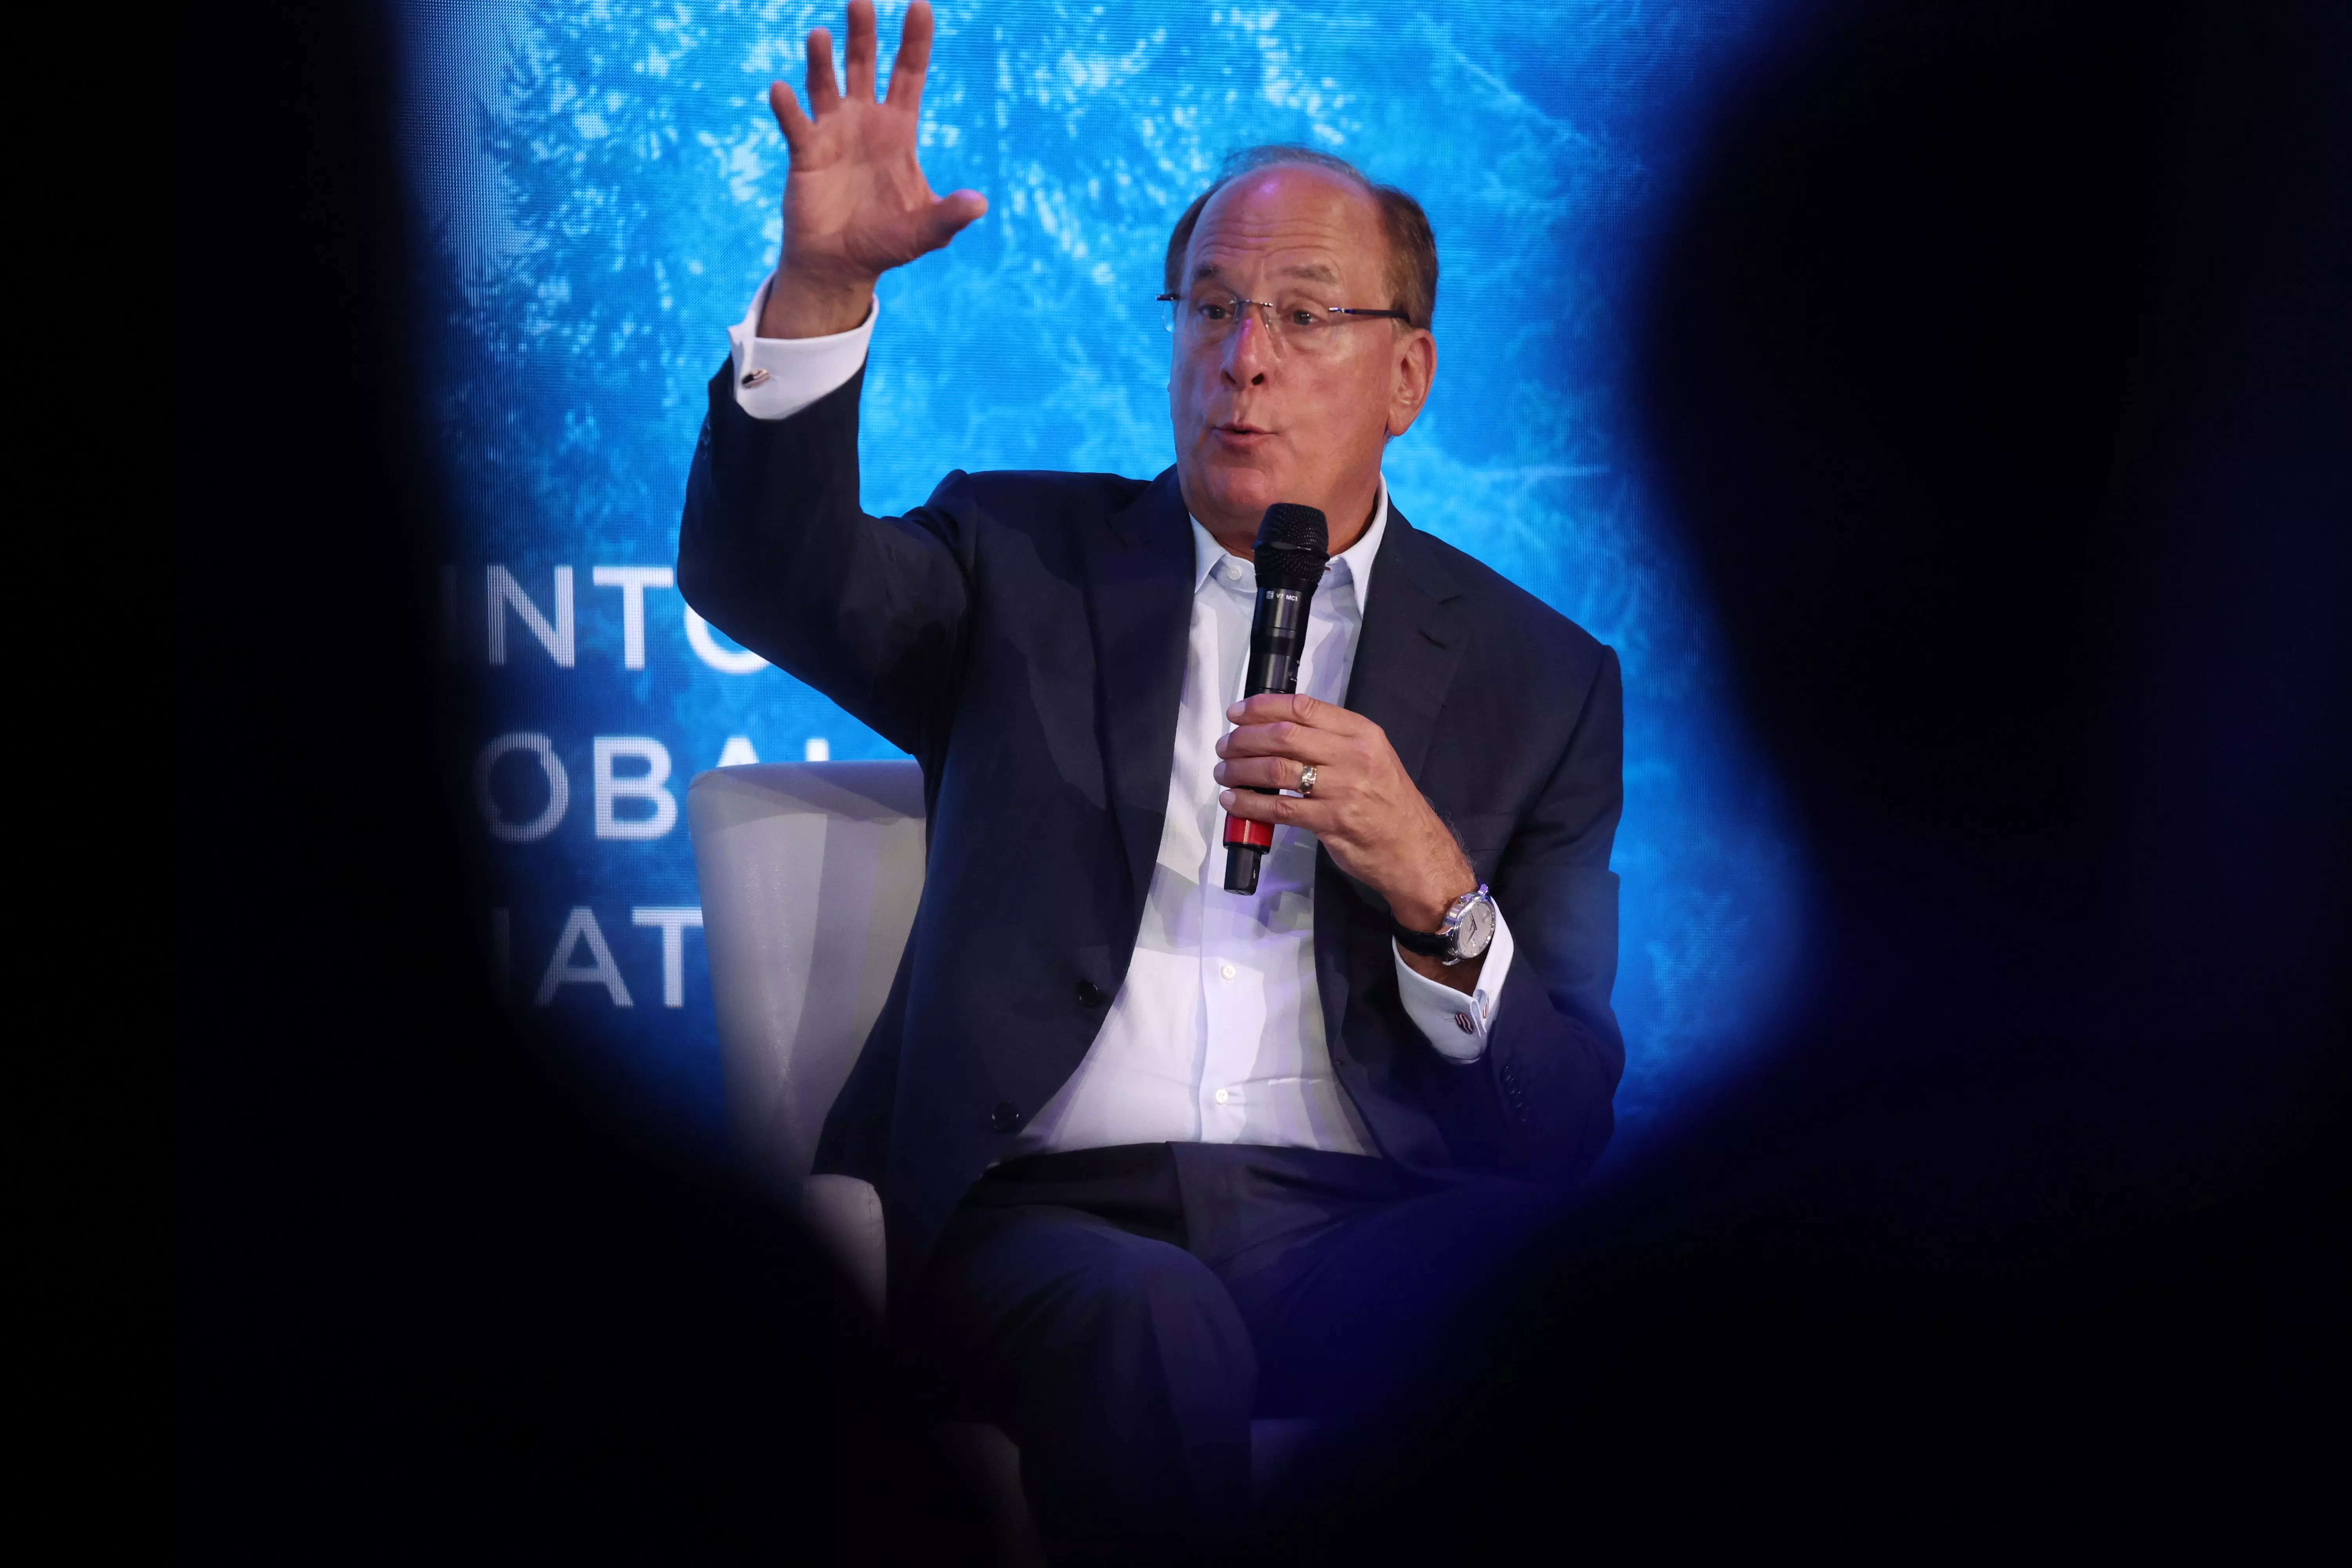 BlackRock CEO Larry Fink raises his arm in front of a blue background.